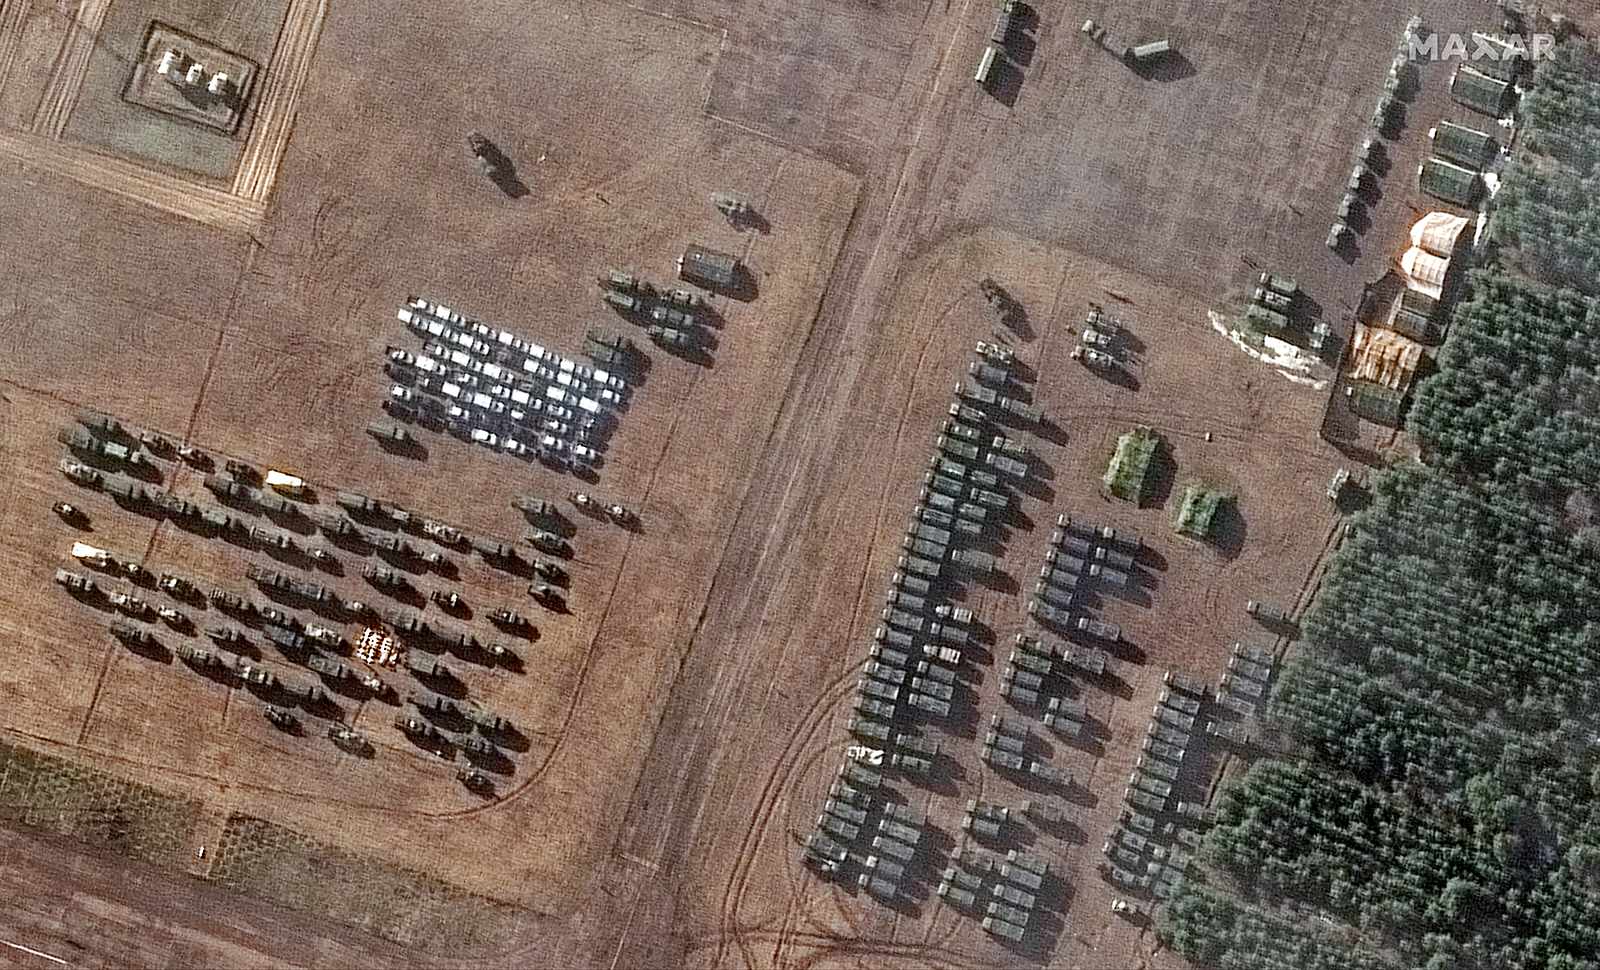 Satellite images show dozens of tents and vehicles that have appeared in recent days at an airfield southwest of Mazyr in southern Belarus.